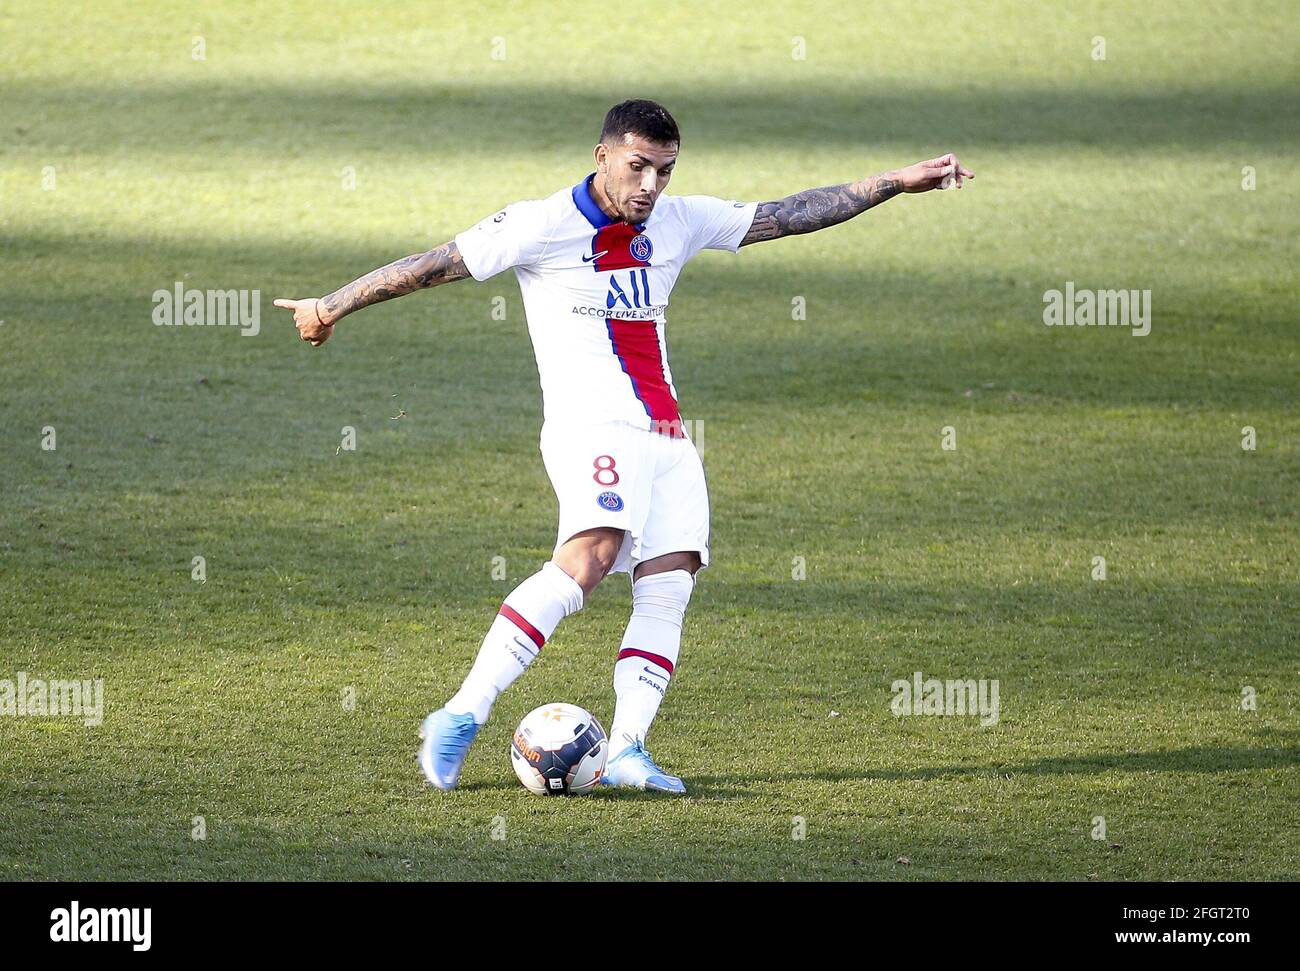 Metz, France. 24th Apr, 2021. Leandro Paredes of PSG during the French  championship Ligue 1 football match between FC Metz and Paris Saint-Germain  (PSG) on April 24, 2021 at Stade Saint-Symphorien in